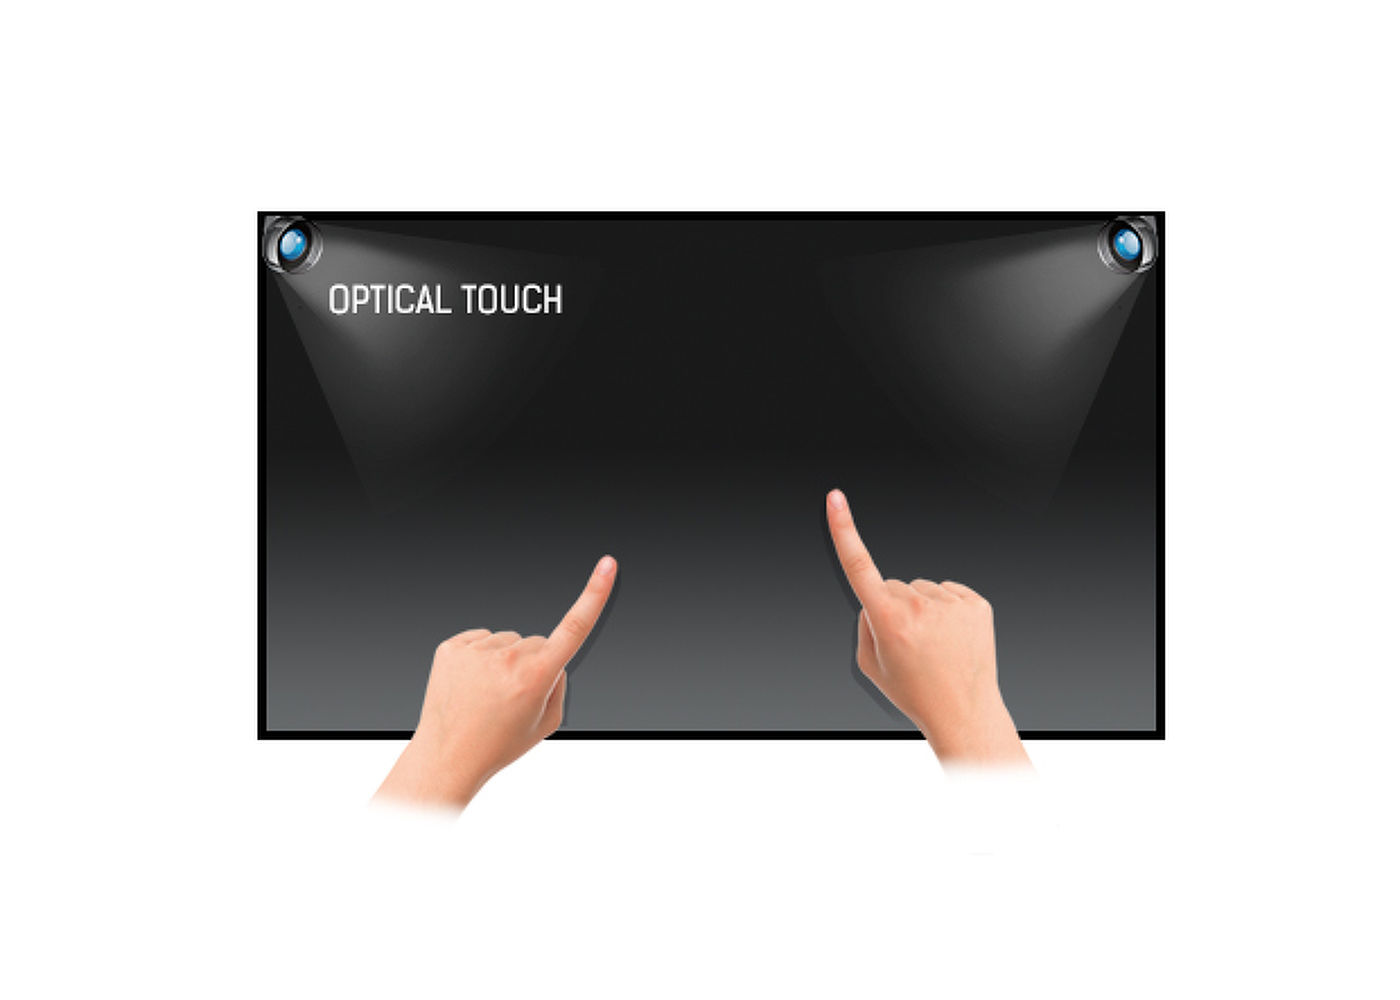 Touch technologie - Optical